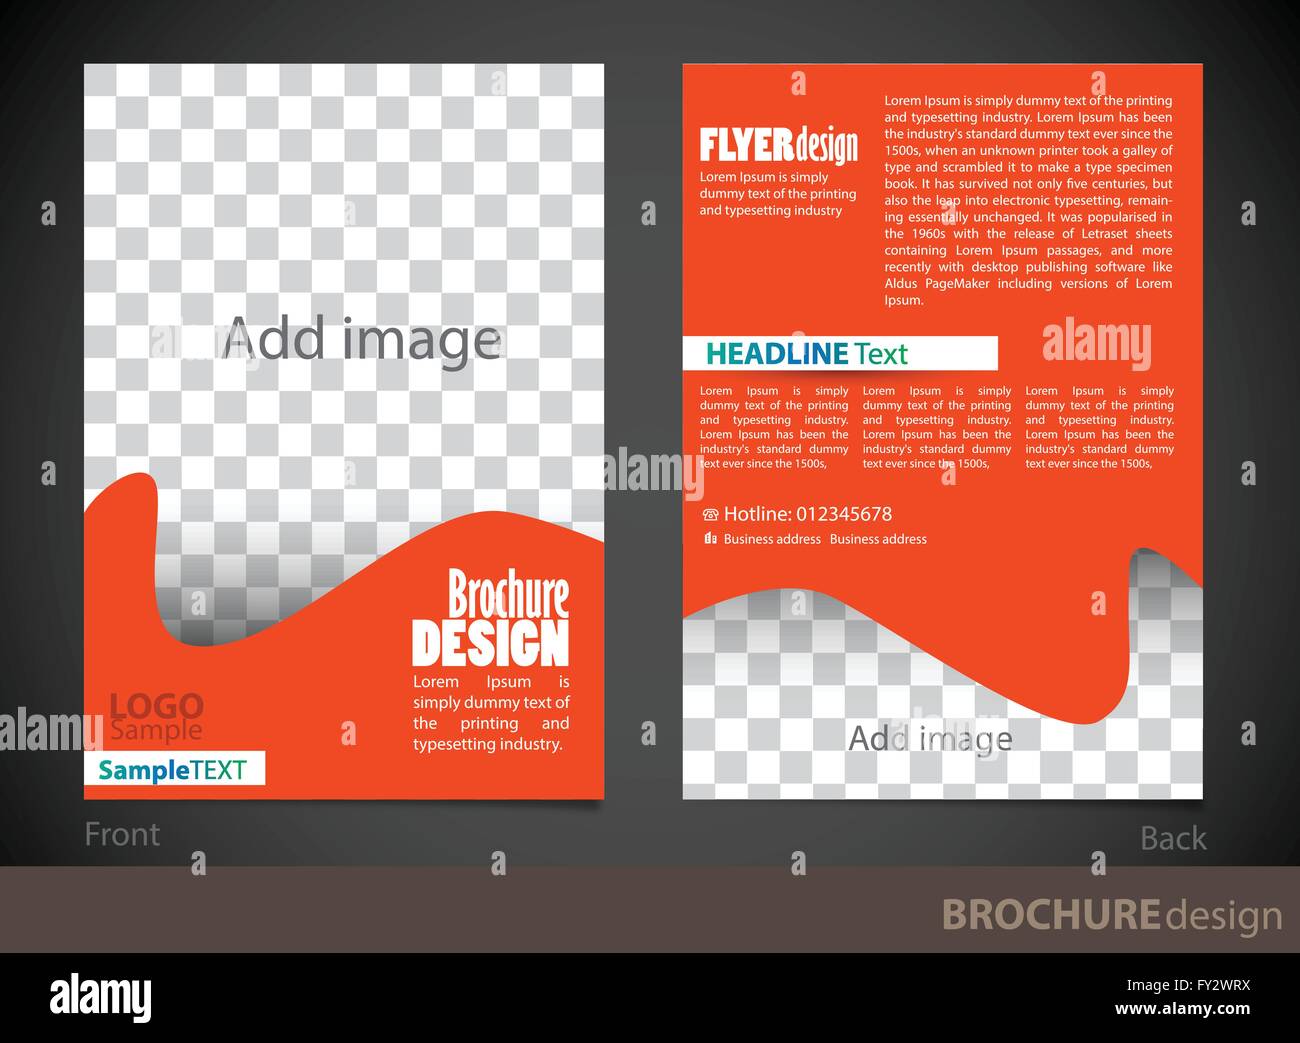 Brochure Design Template Proportionally For Size Stock Vector Image Art Alamy